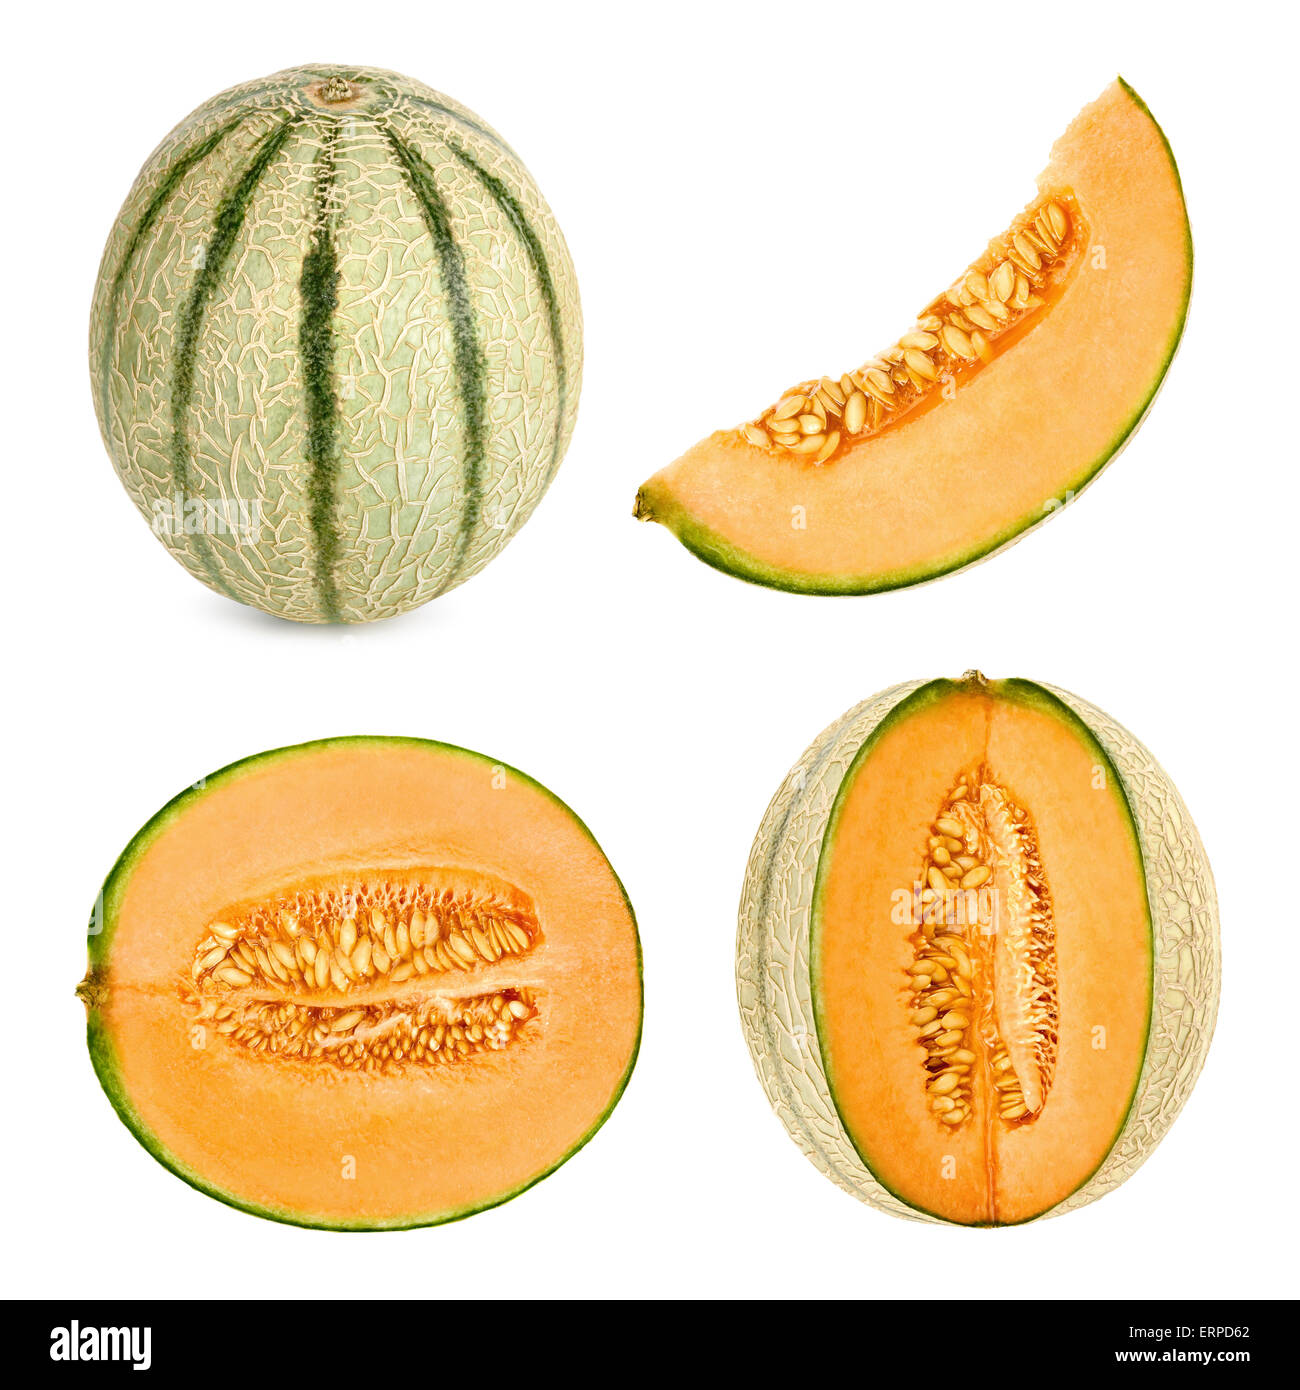 Collage set of 4 studio shots of a Cantaloupe melon, also referred to as honeydew, cut in different shapes, isolated on white ba Stock Photo